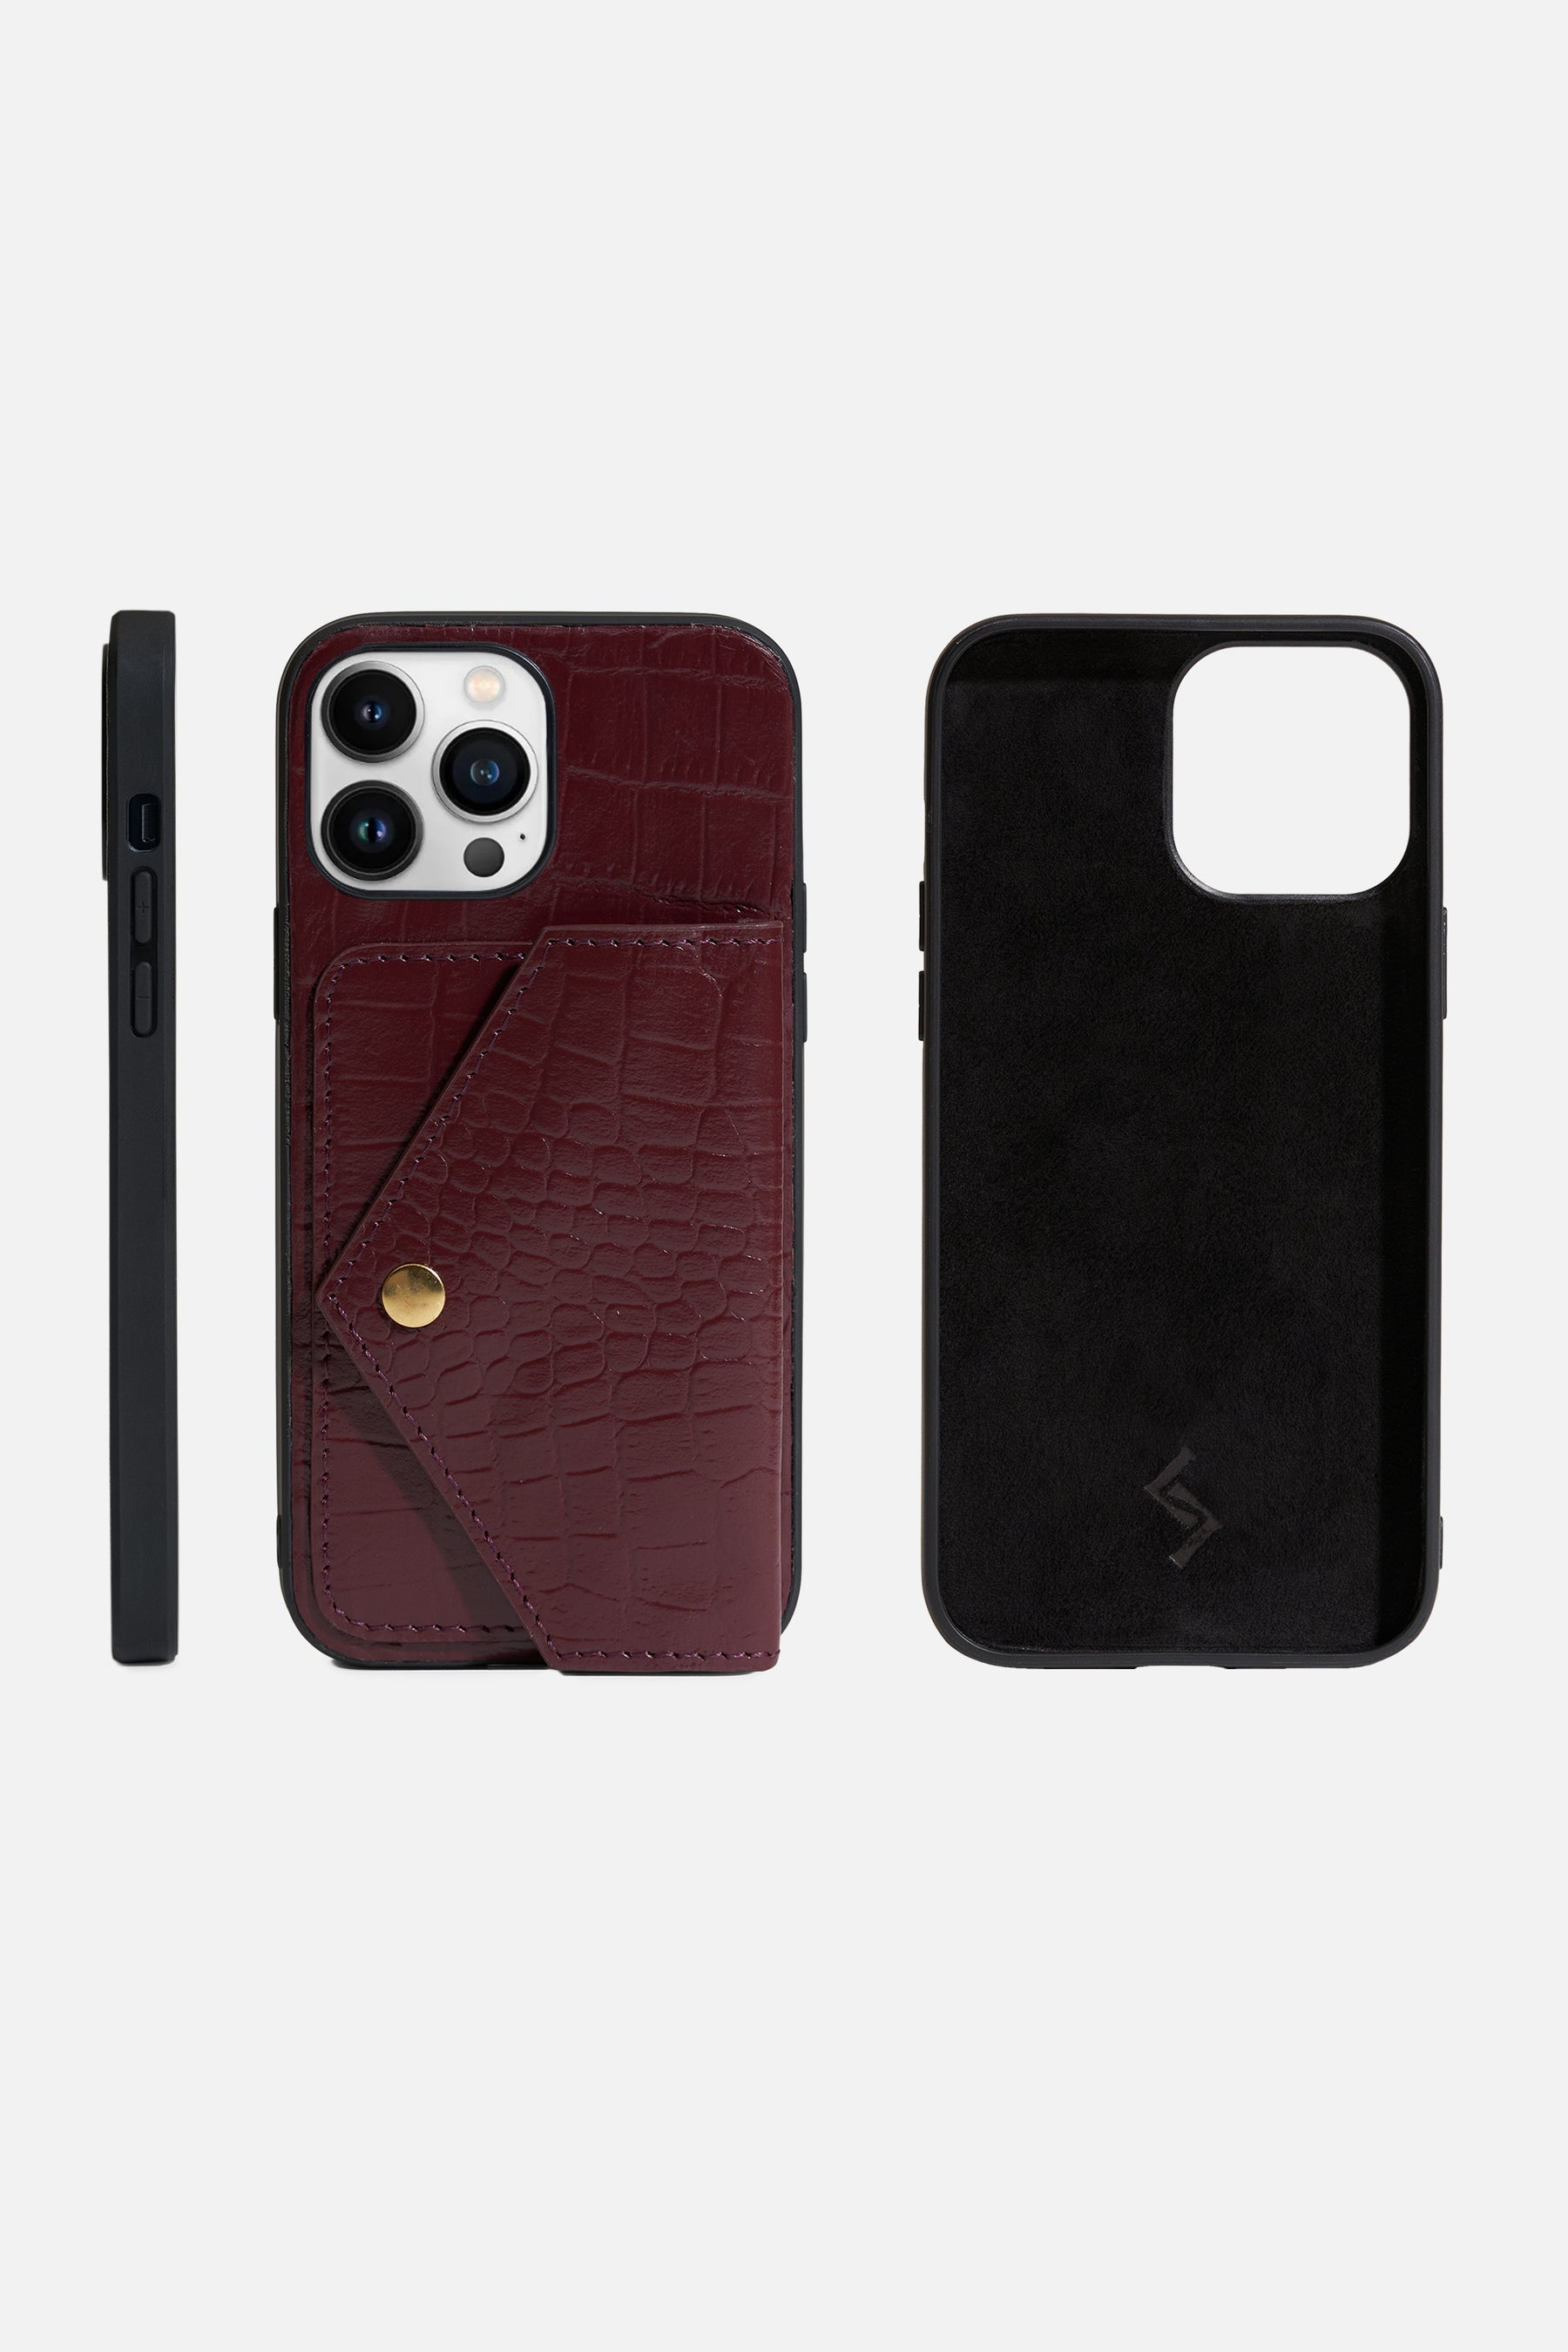 IPHONE CASES WITH FLAP POCKET - WINE